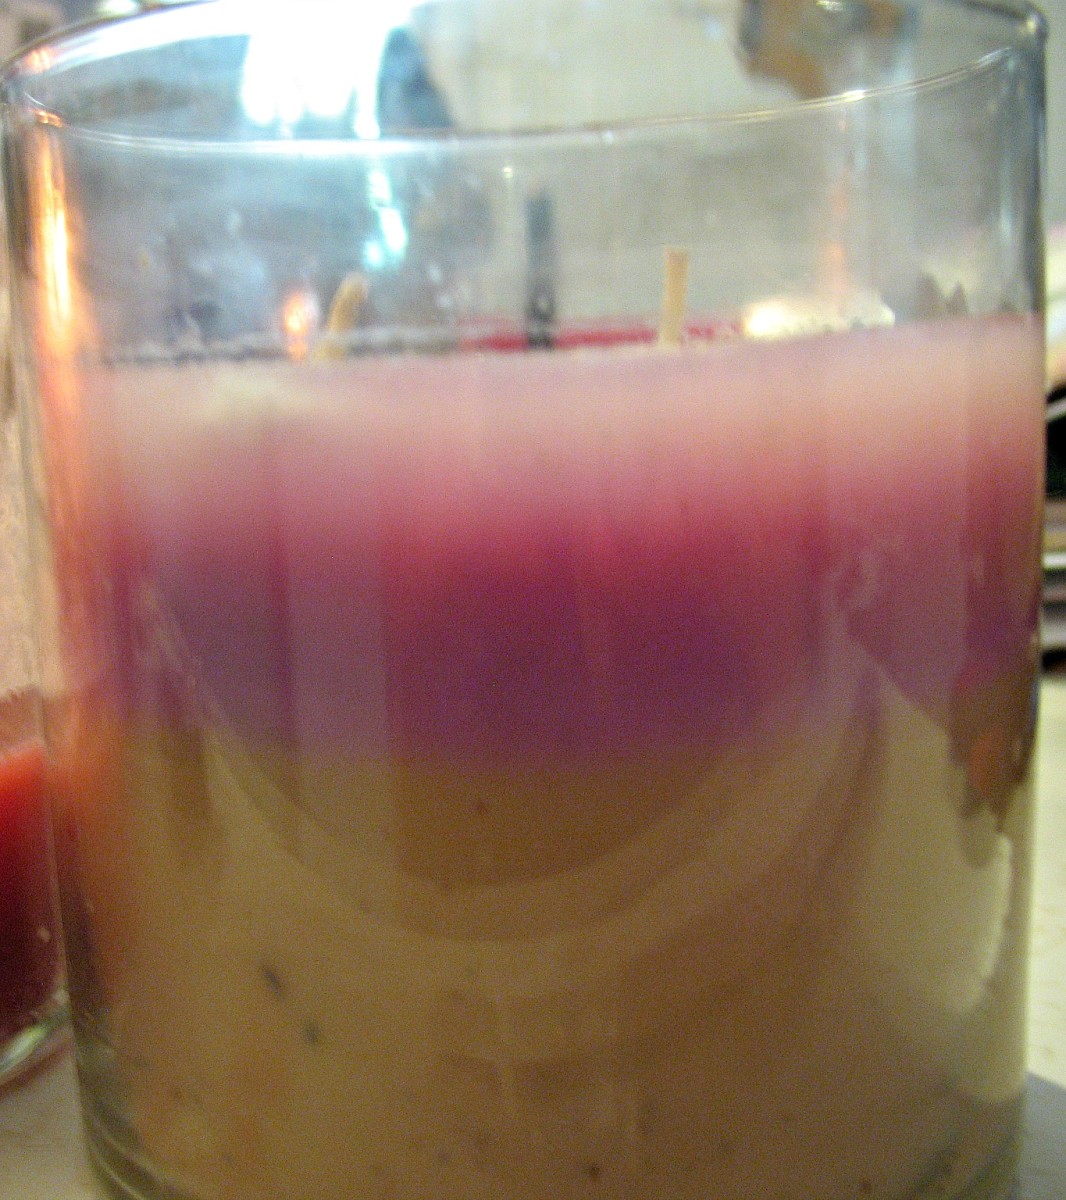 Example of Striped Candle That Results from the Leftover Wax from Multiple Batches